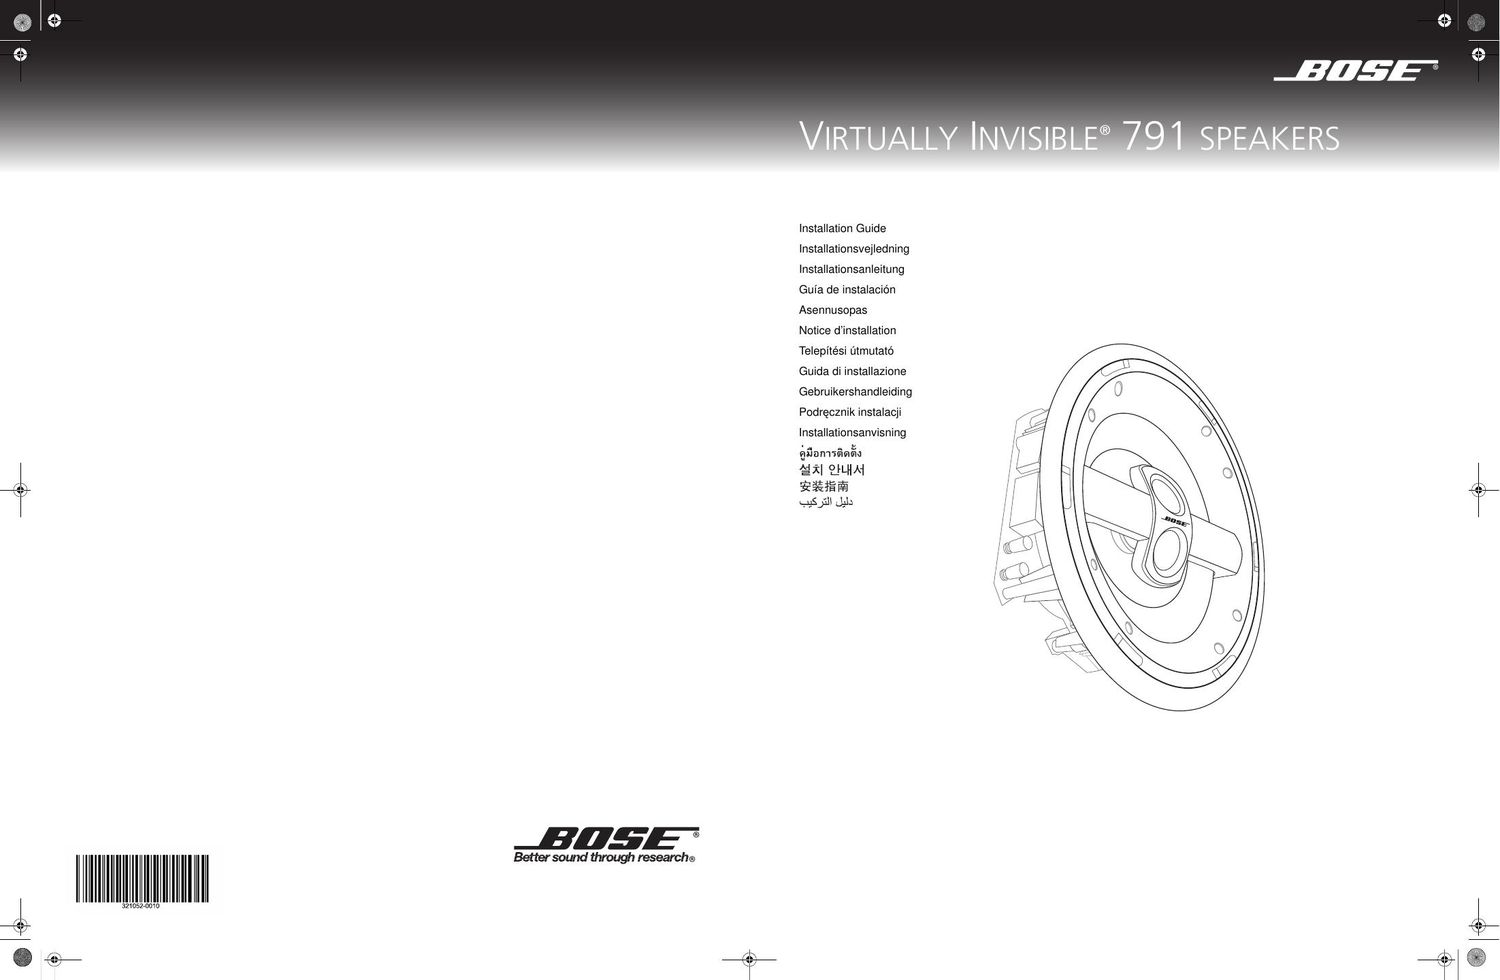 bose virtallyinvisible 791 owners guide